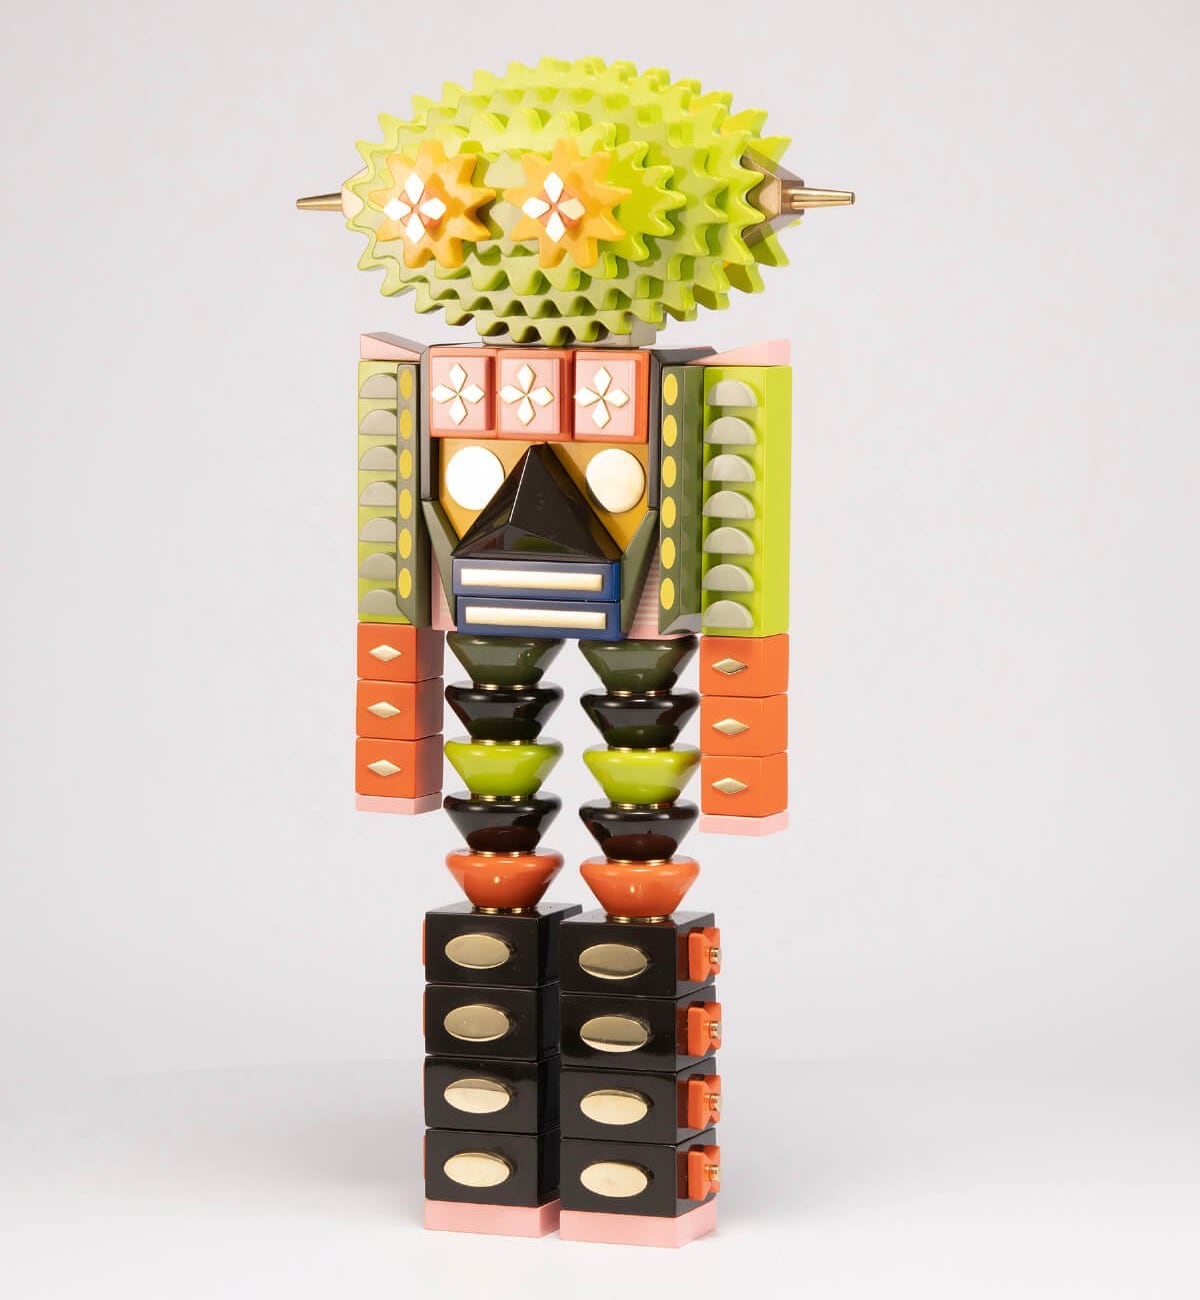 A robot with a pointed jackfruit-like head and a body made of geometric blocks